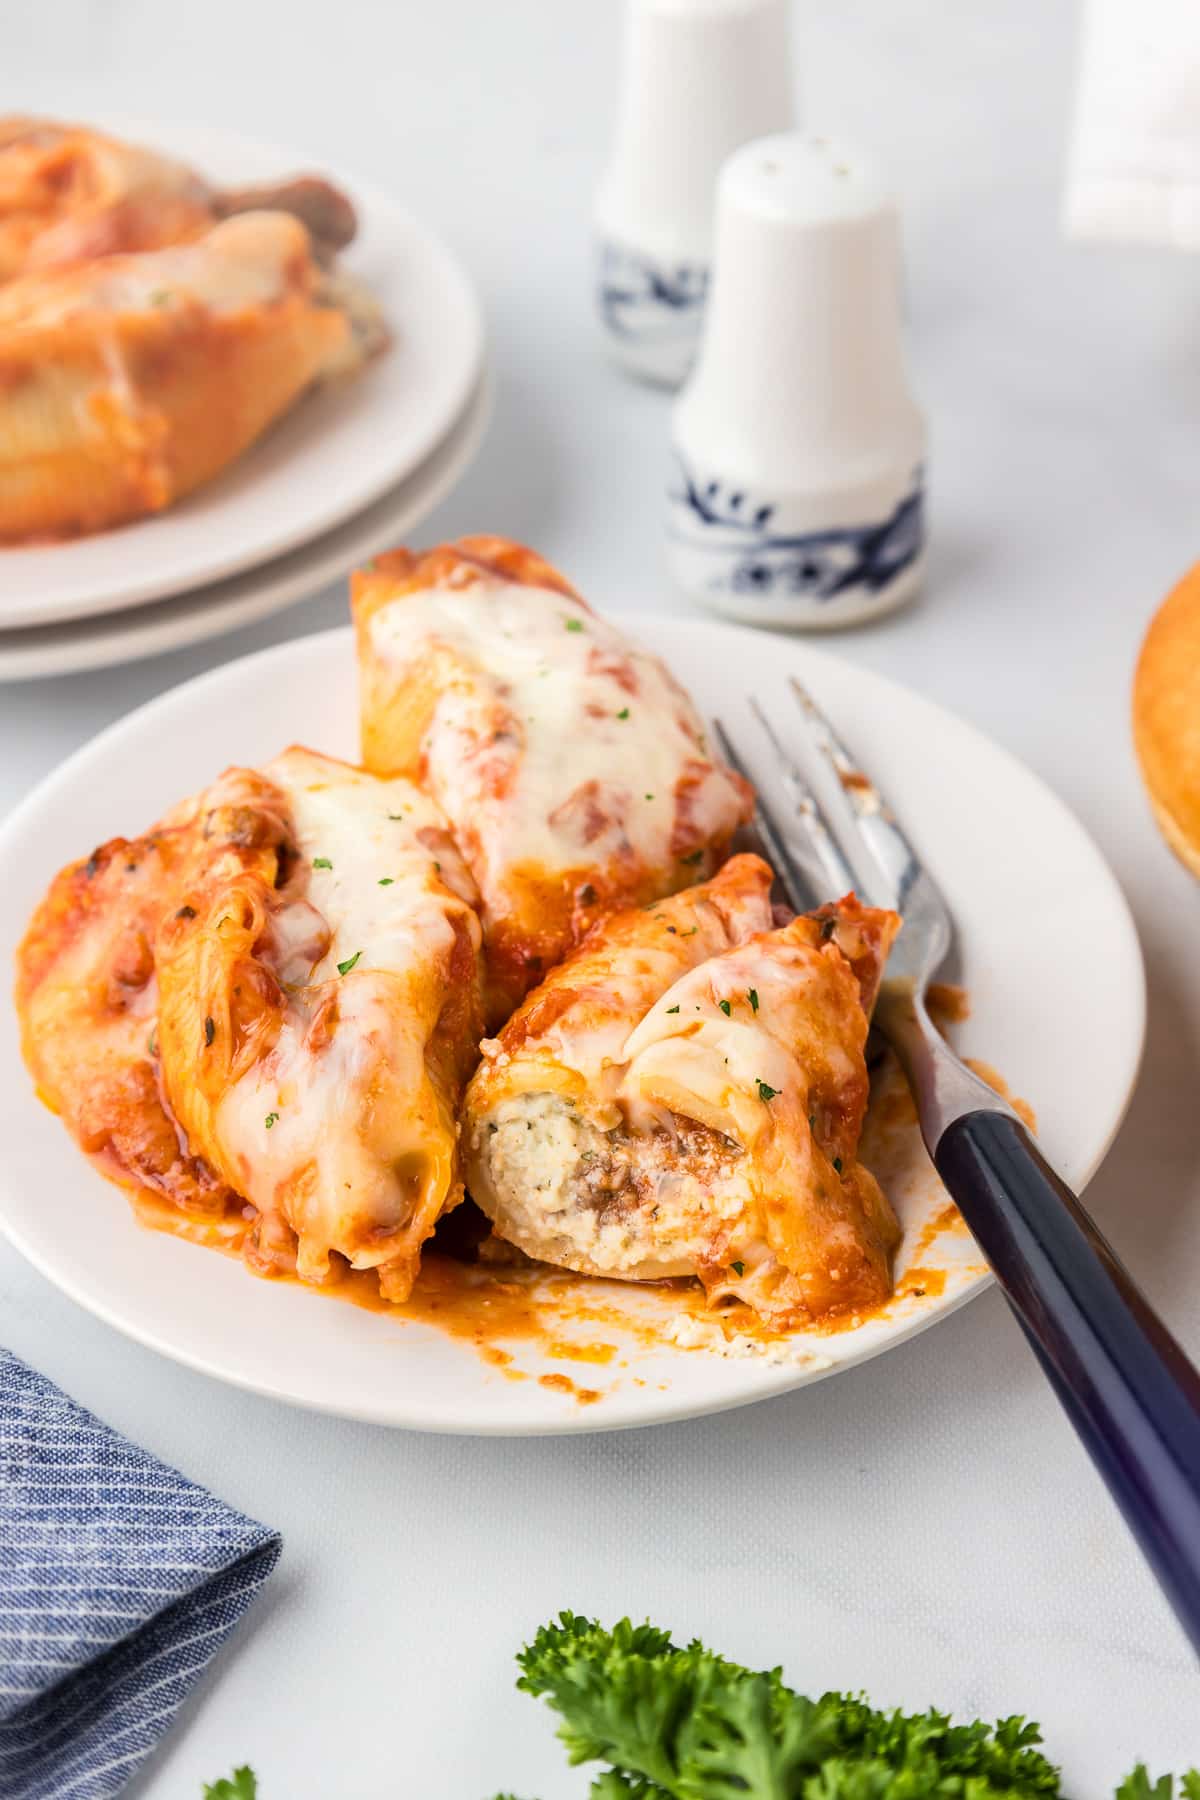 Chicken stuffed shells on a plate next to a fork.